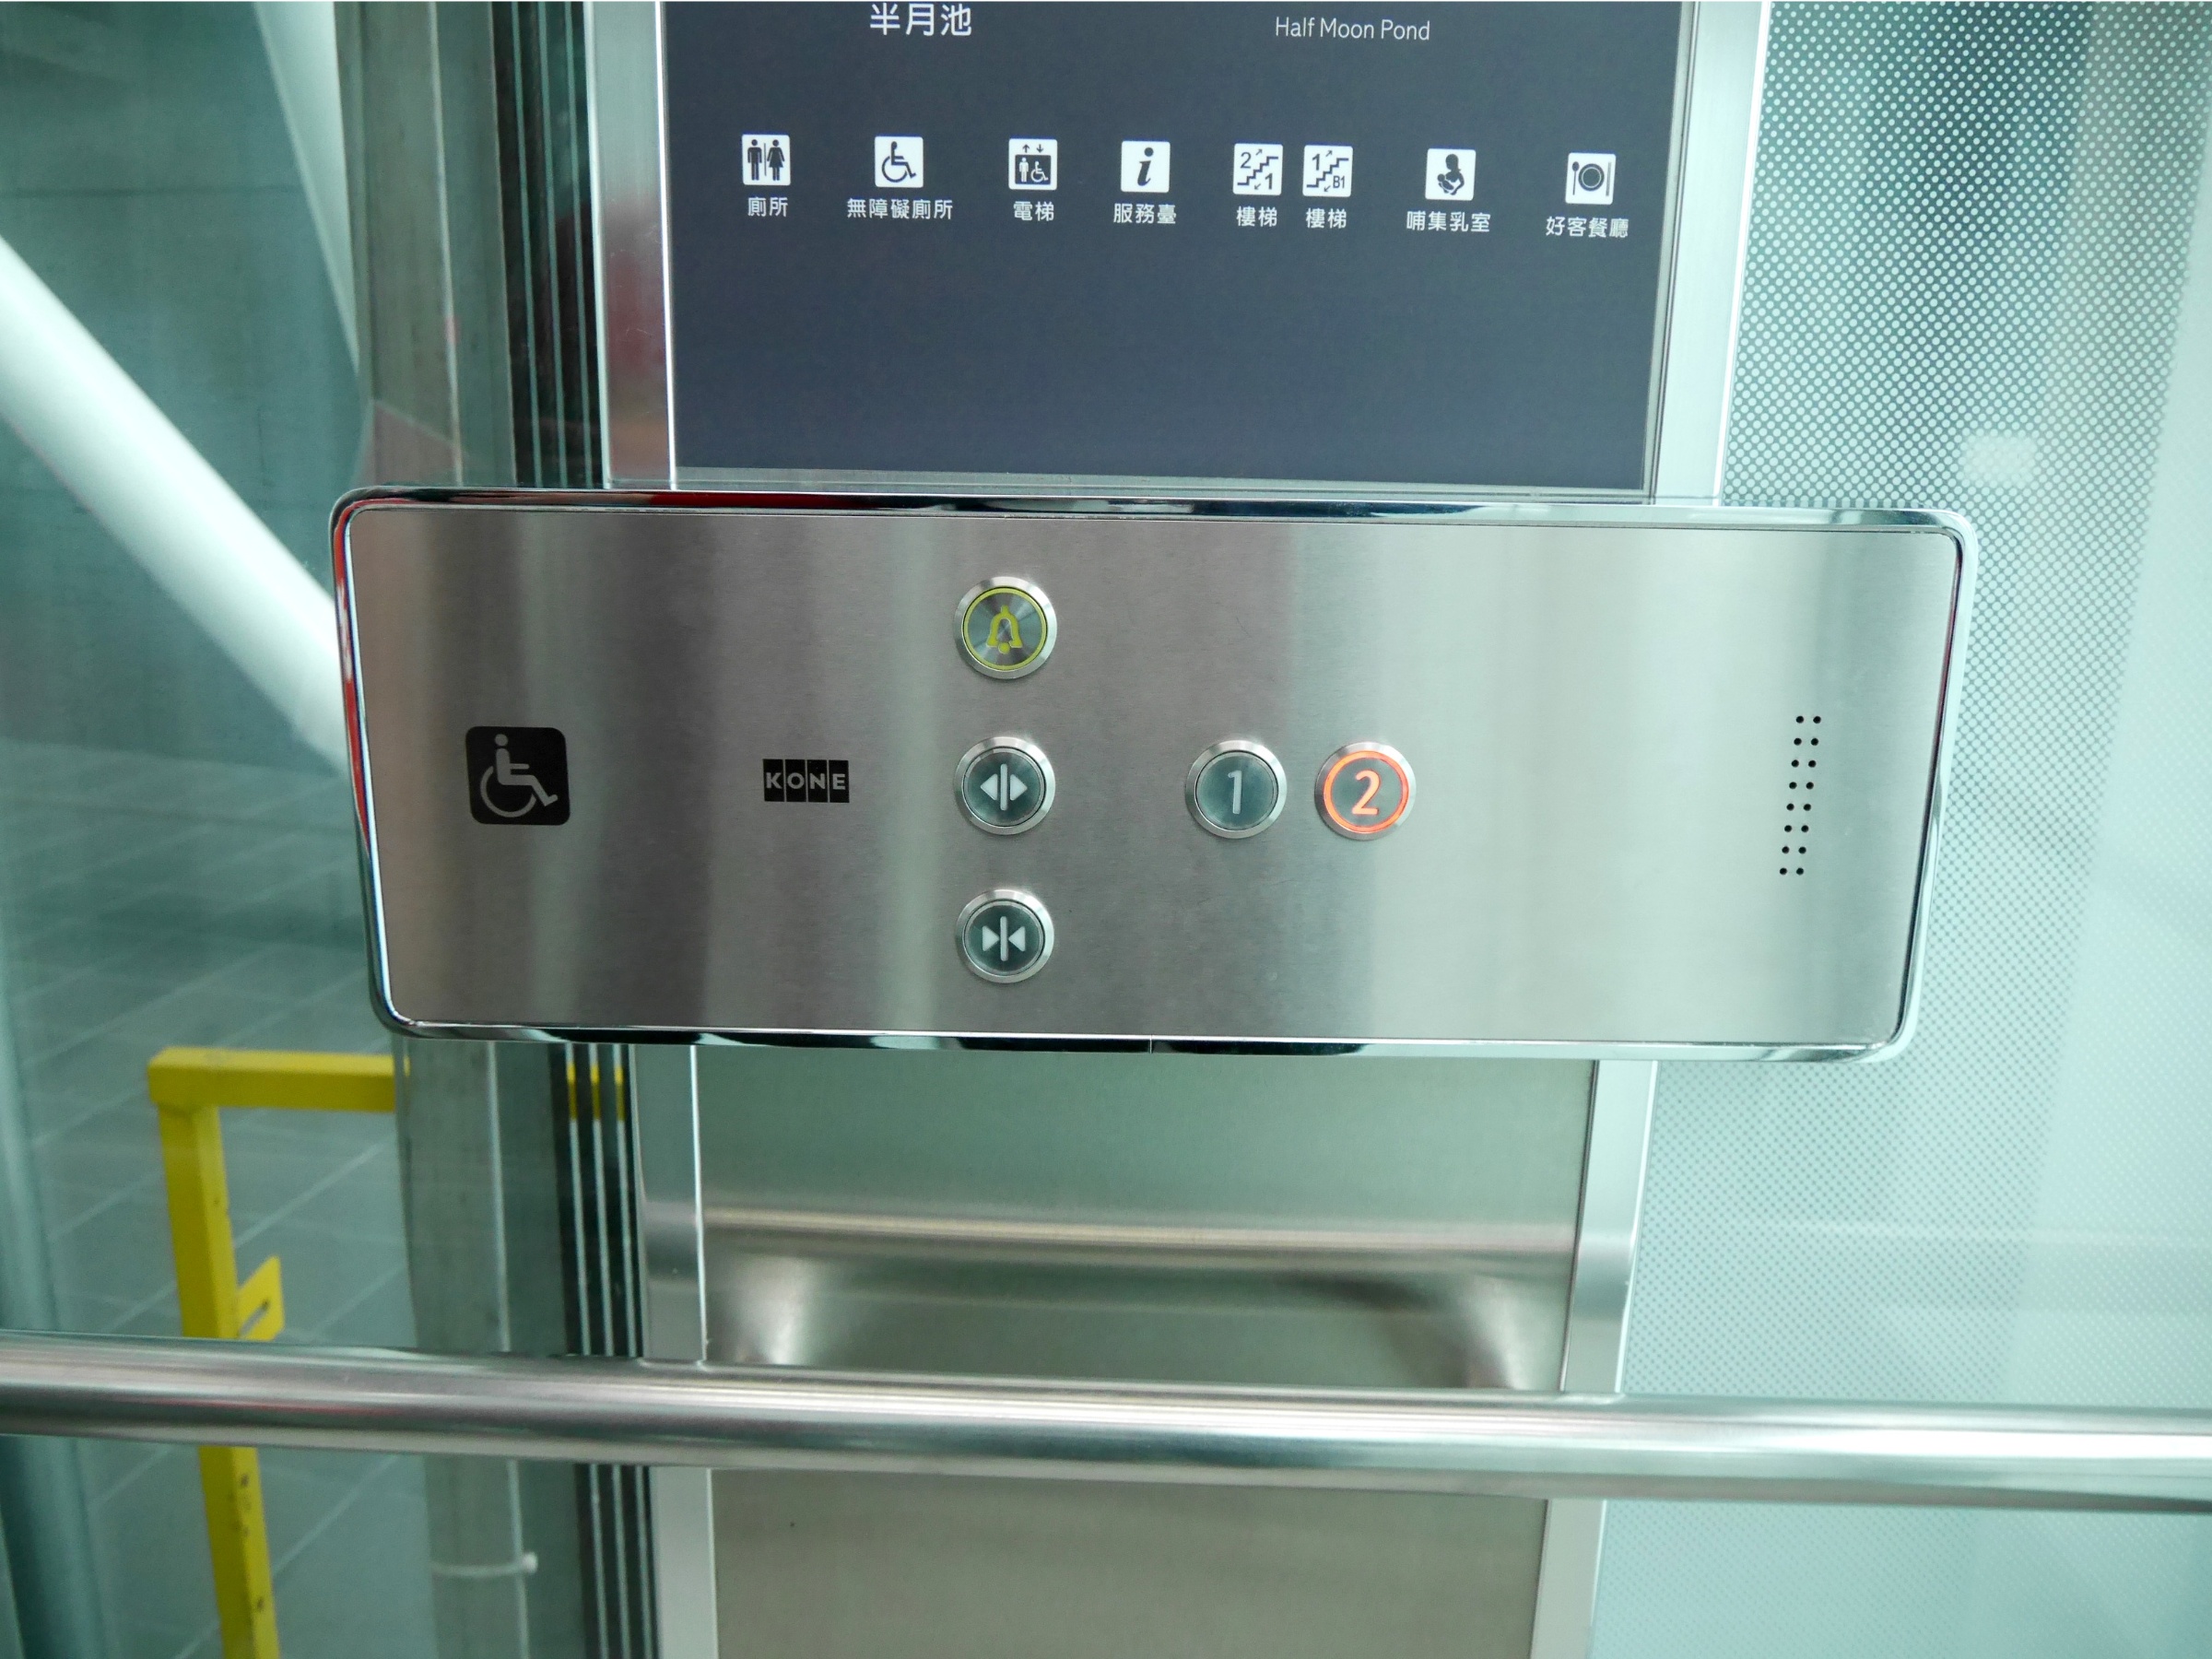 Accessible lift button